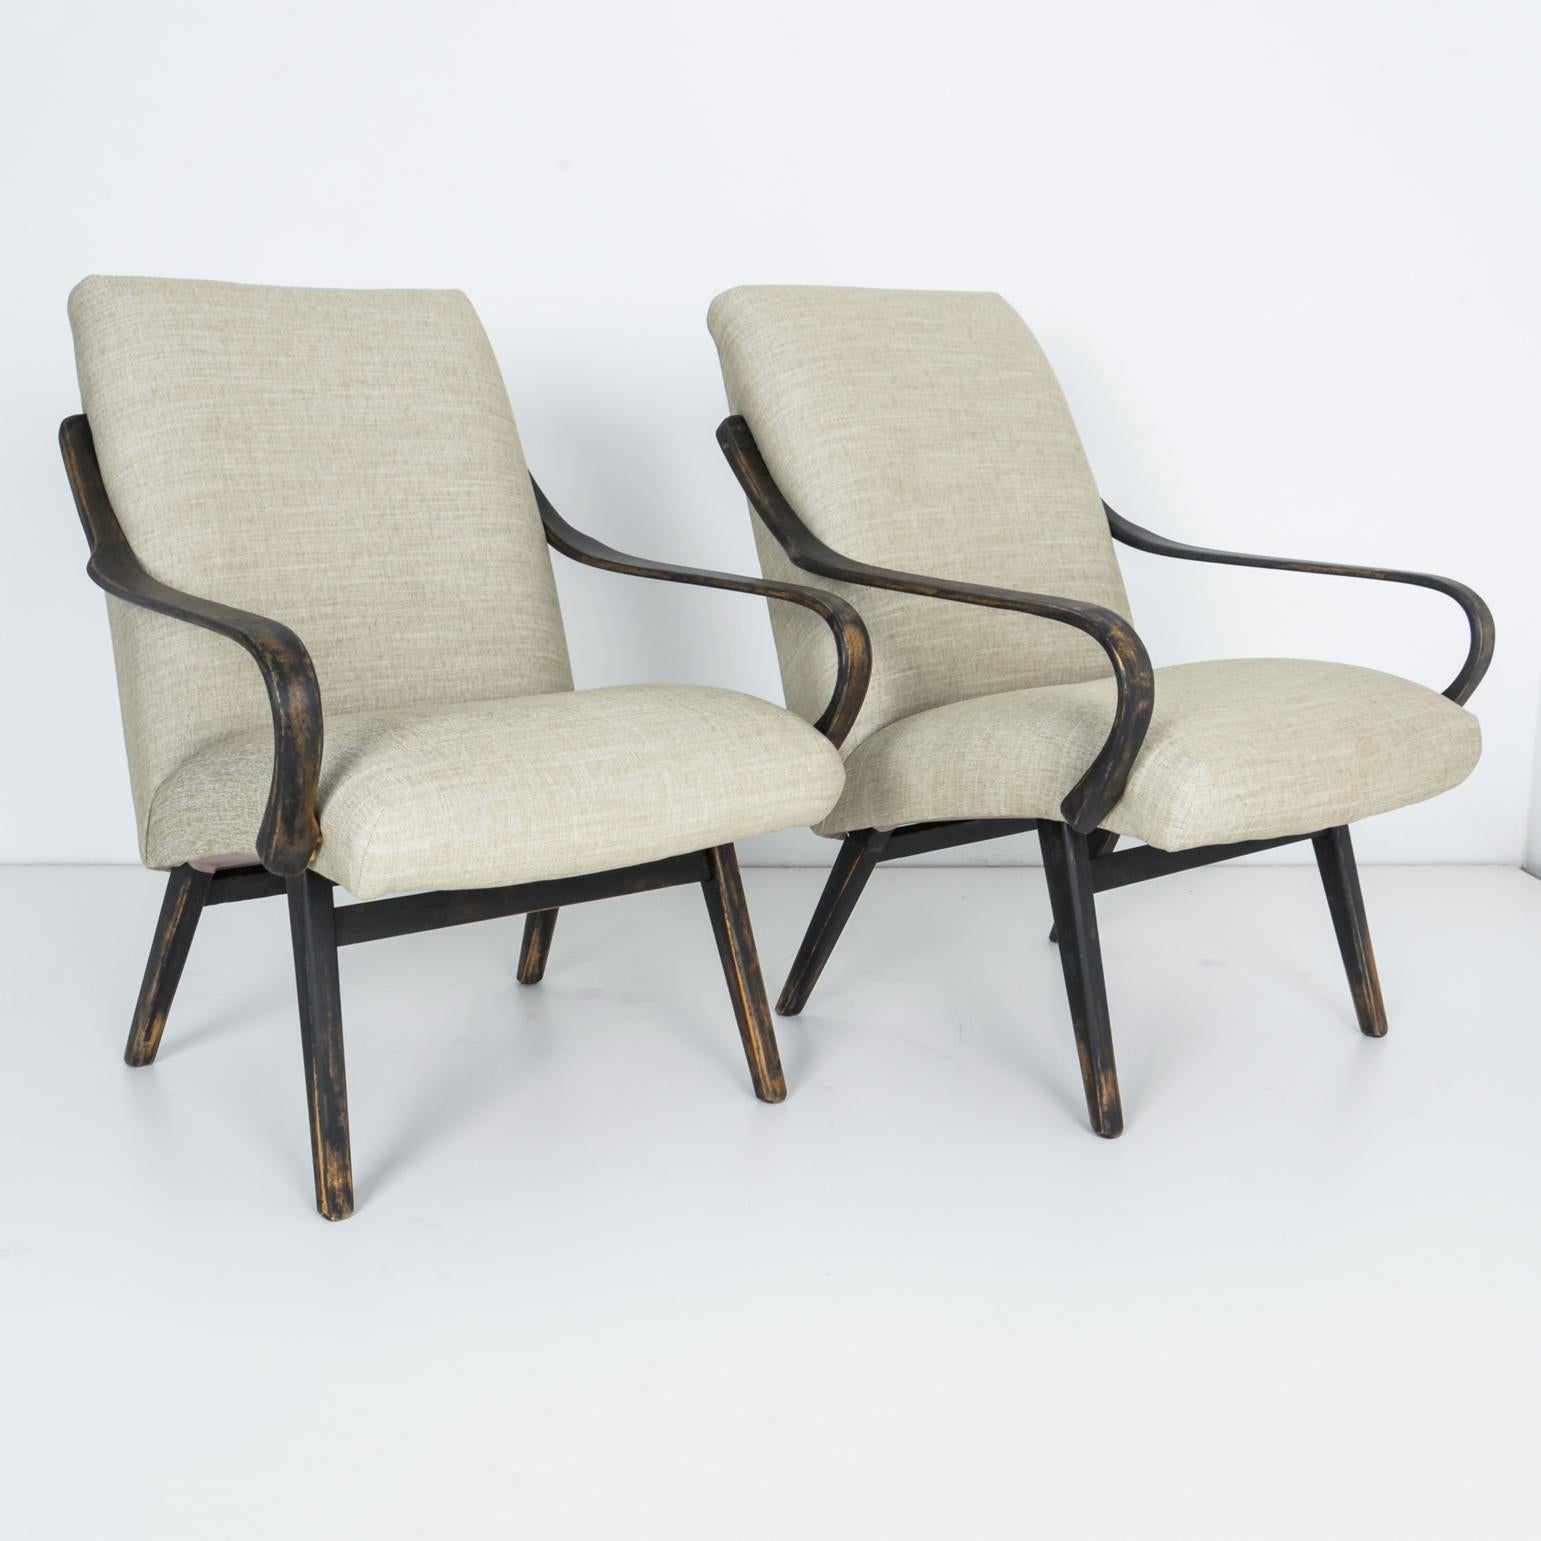 Mid-20th Century 1960s Midcentury Czech Lounge Chairs, a Pair